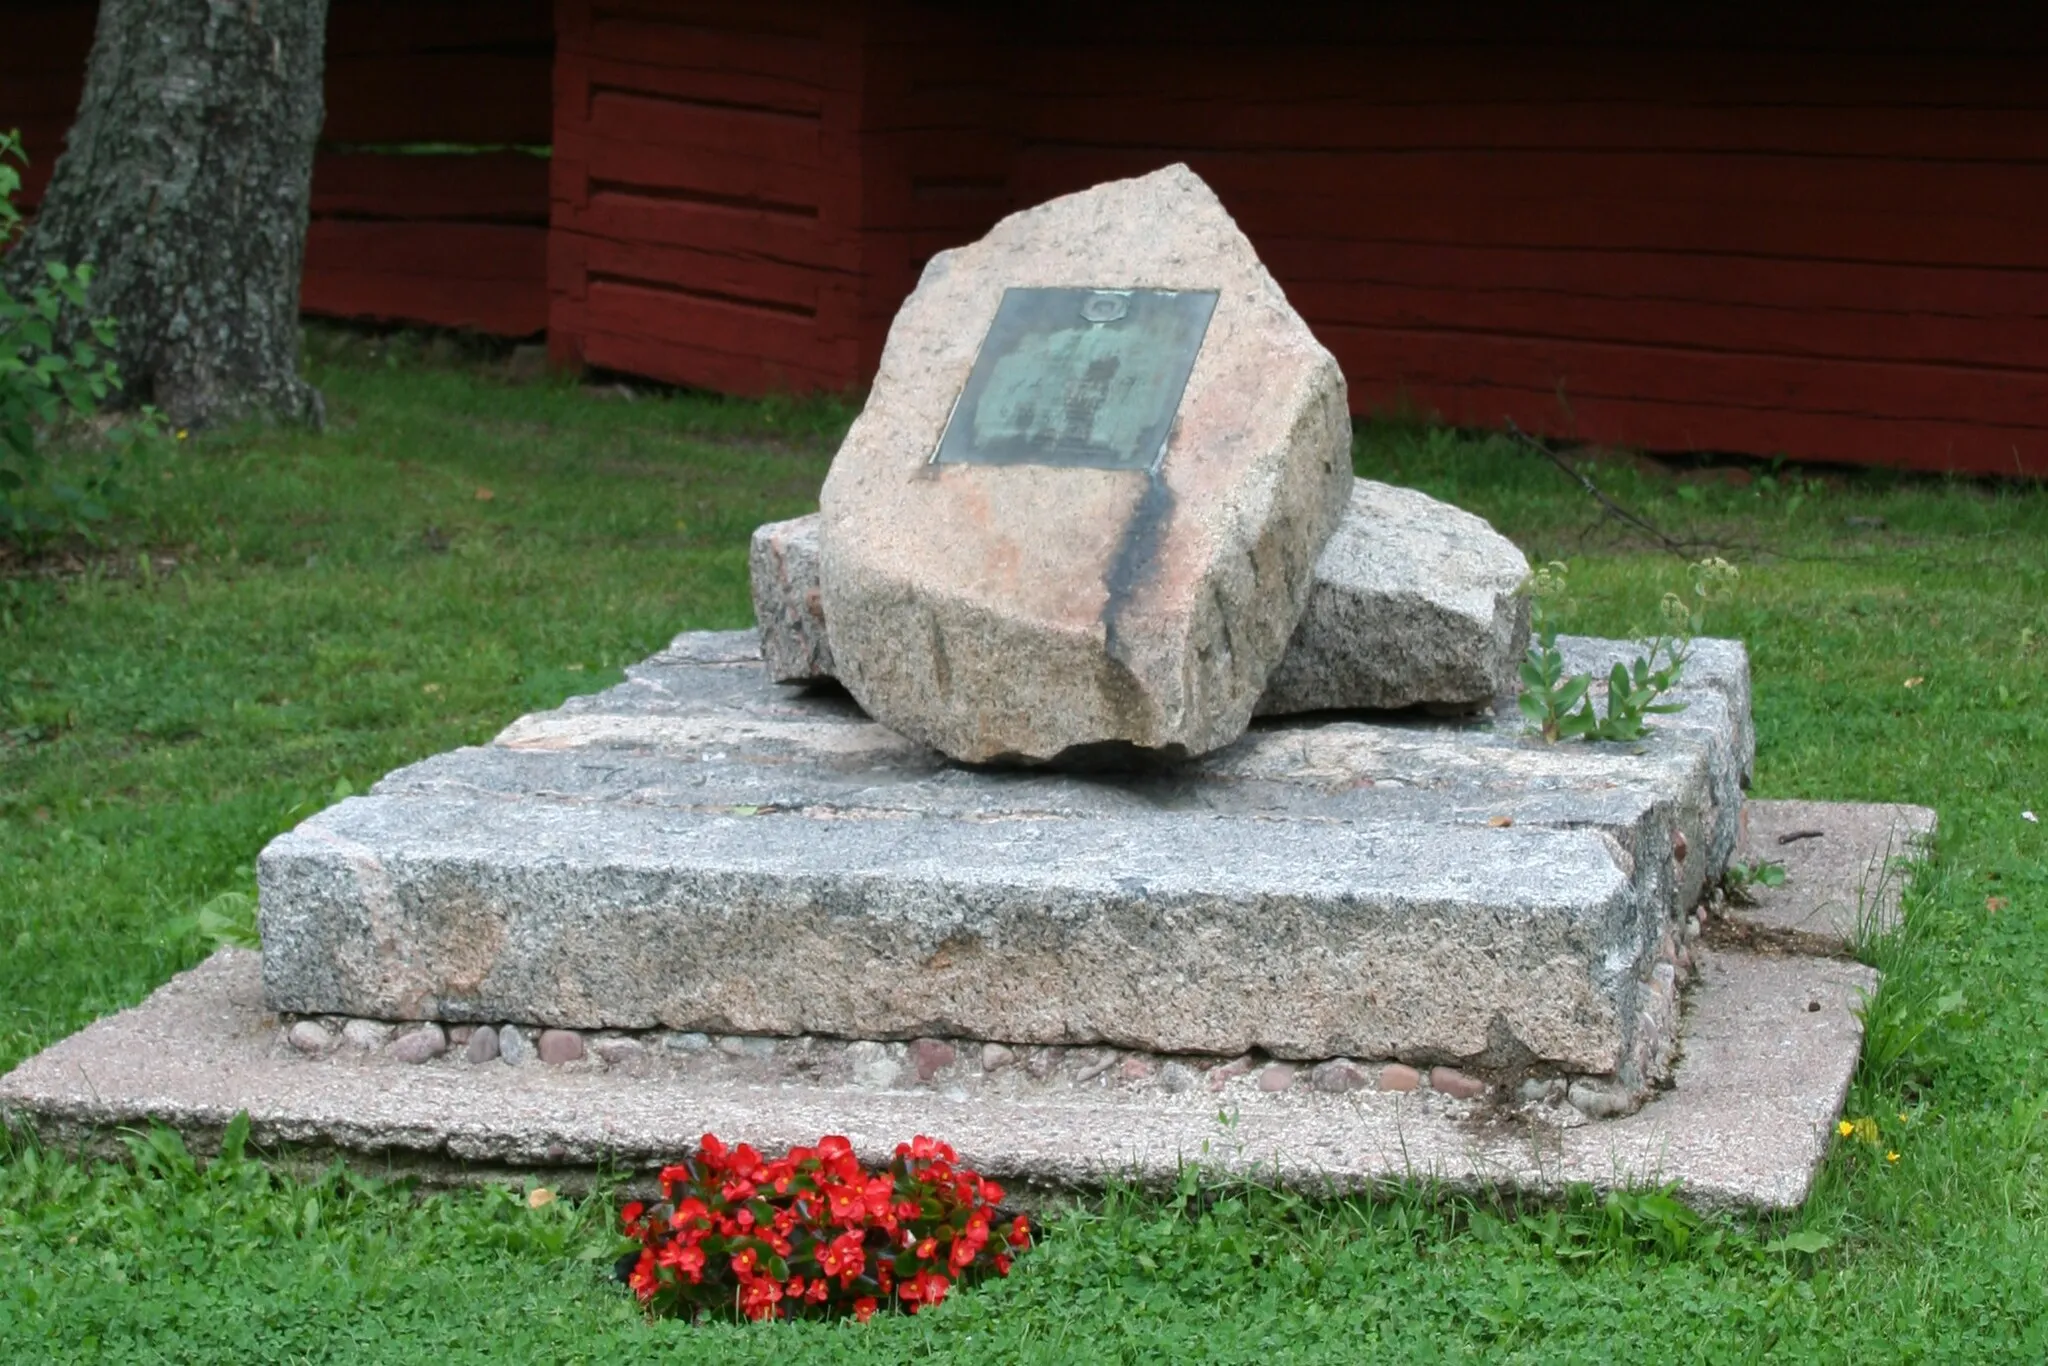 Photo showing: Antti Lizelius memorial stone, Pöytyä, Finland. Lizelius was a finish vicar, born in 12.10.1708, died 15.10.1795. This memorial stone and plaque was mounted 12.10.1958.